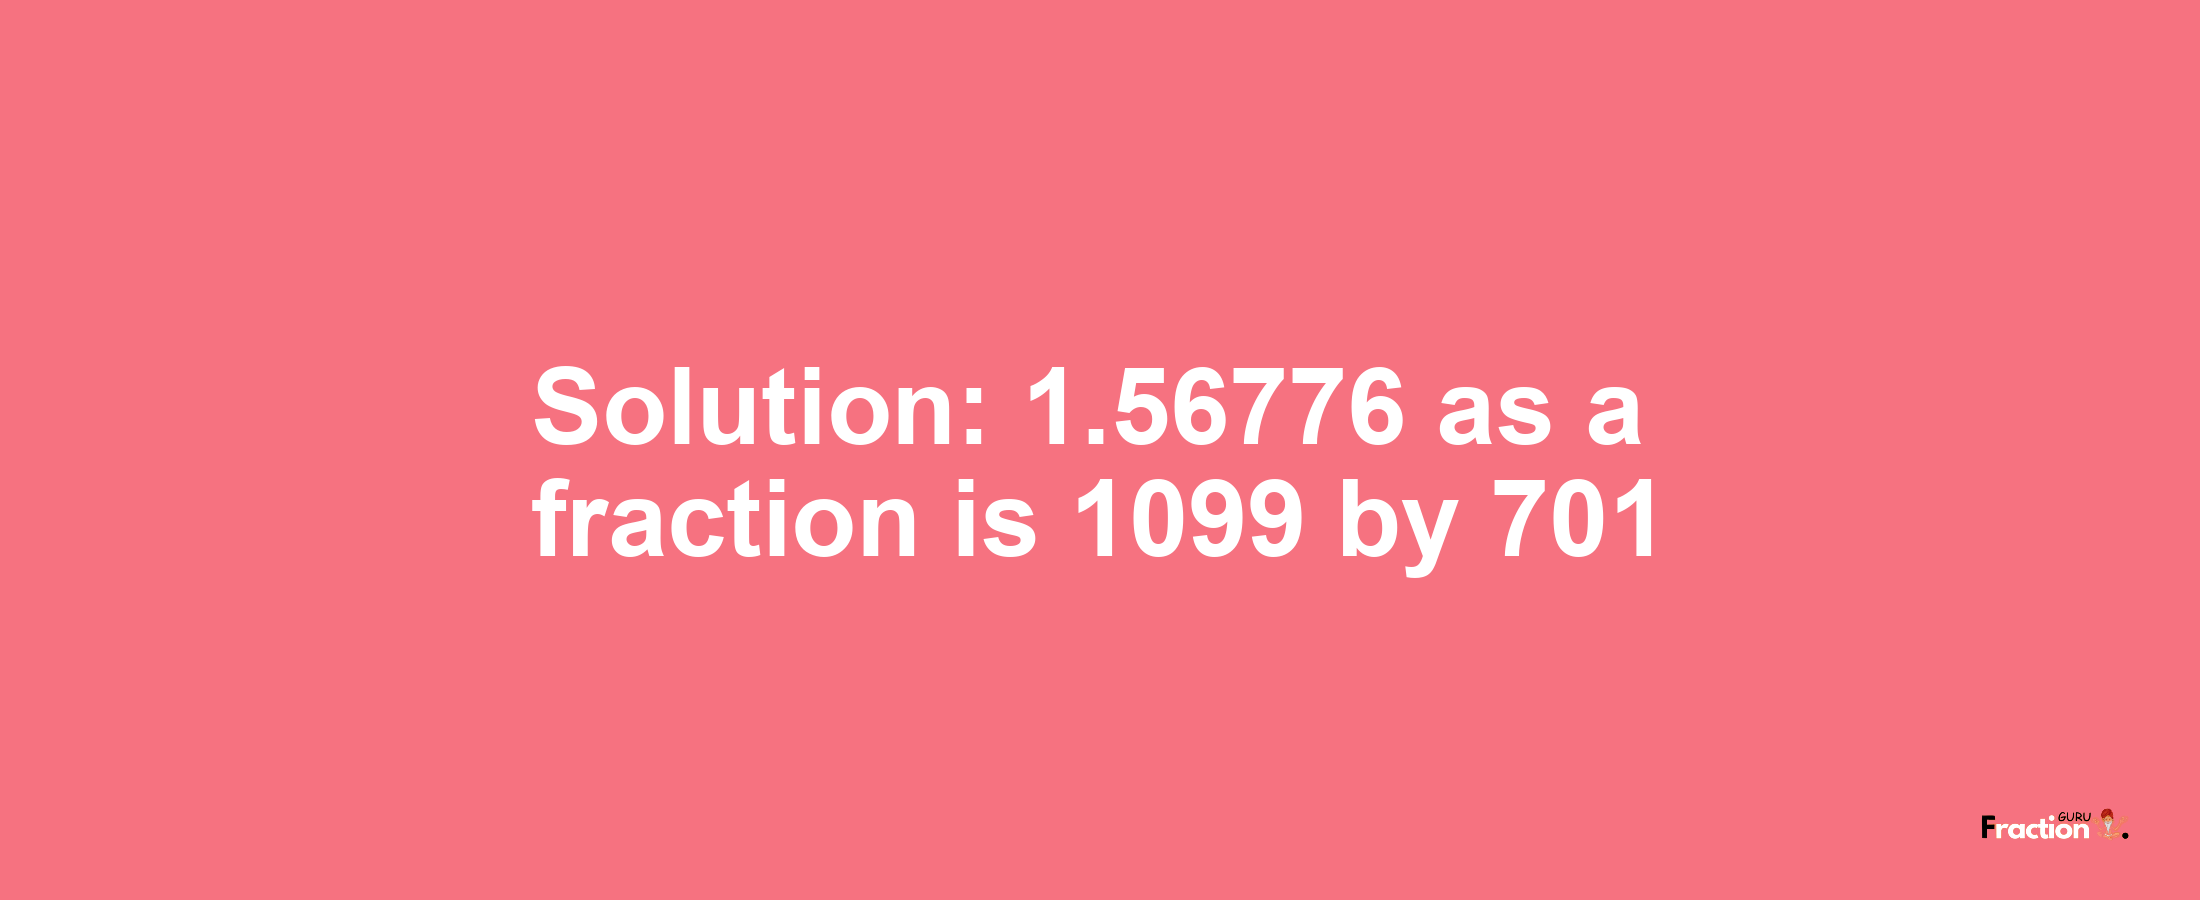 Solution:1.56776 as a fraction is 1099/701